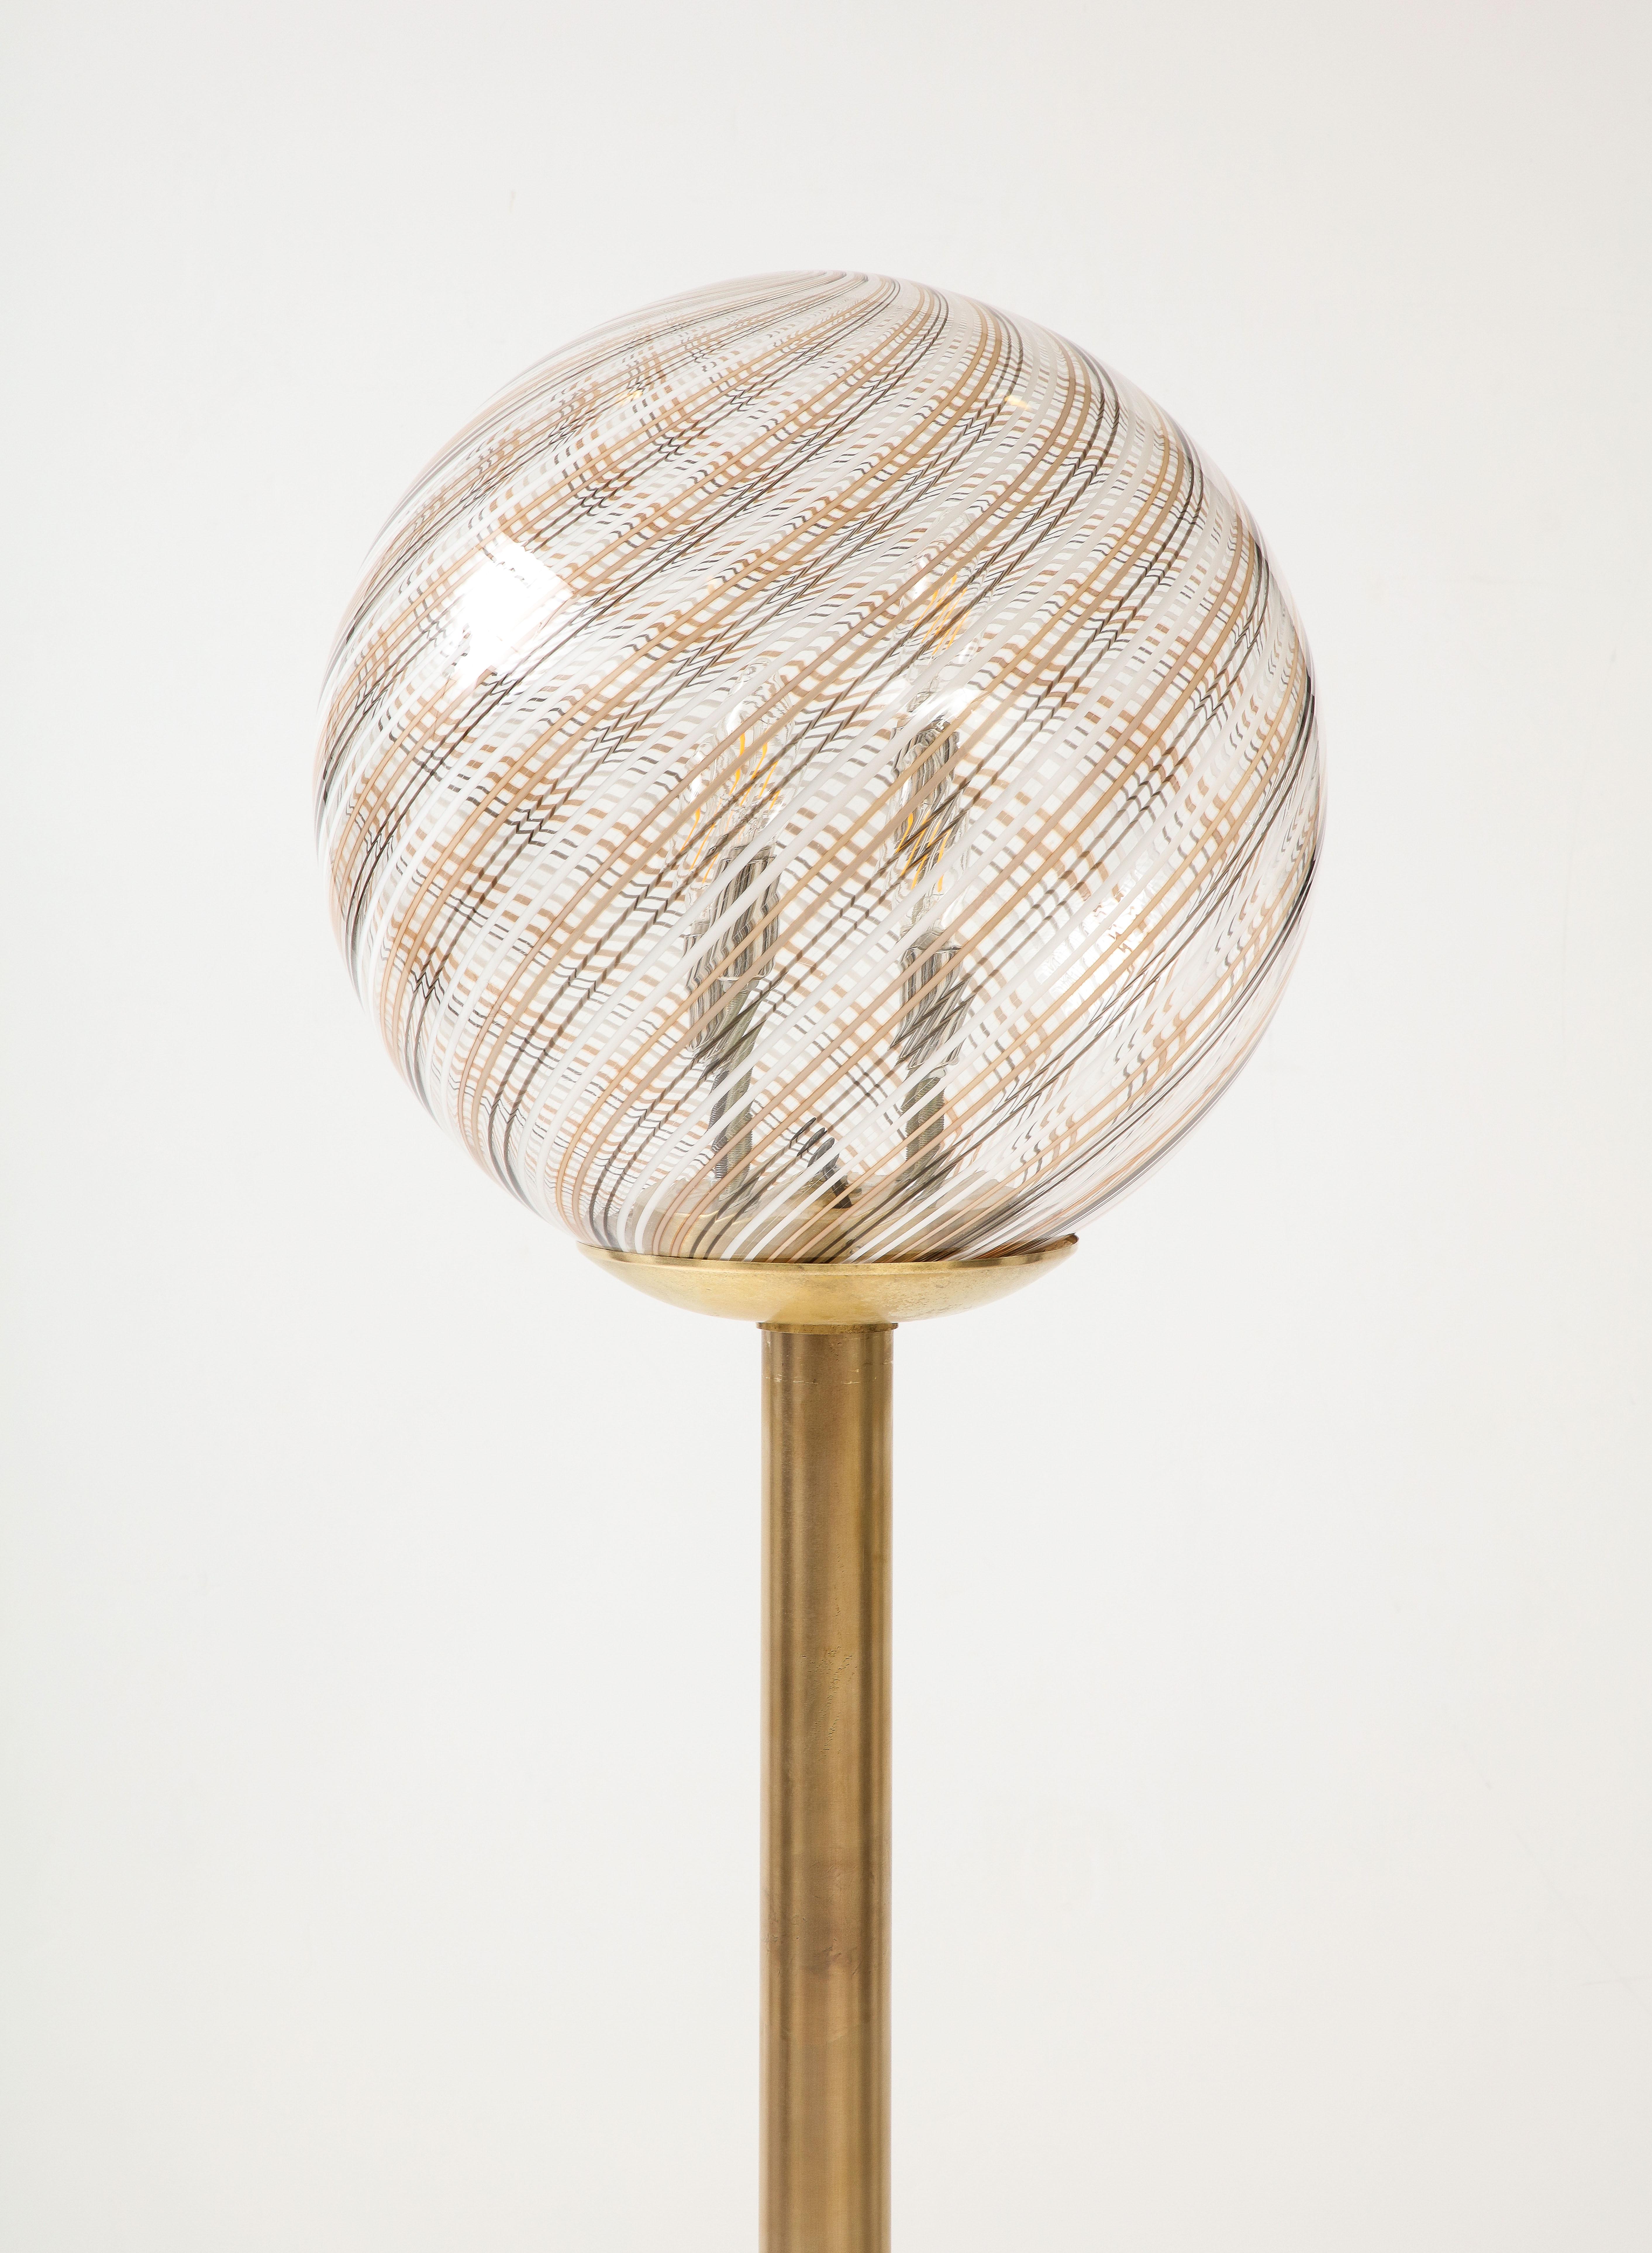 Italian Modernist Brass Floor Lamp with Glass Globe, circa 1970 In Good Condition For Sale In New York, NY